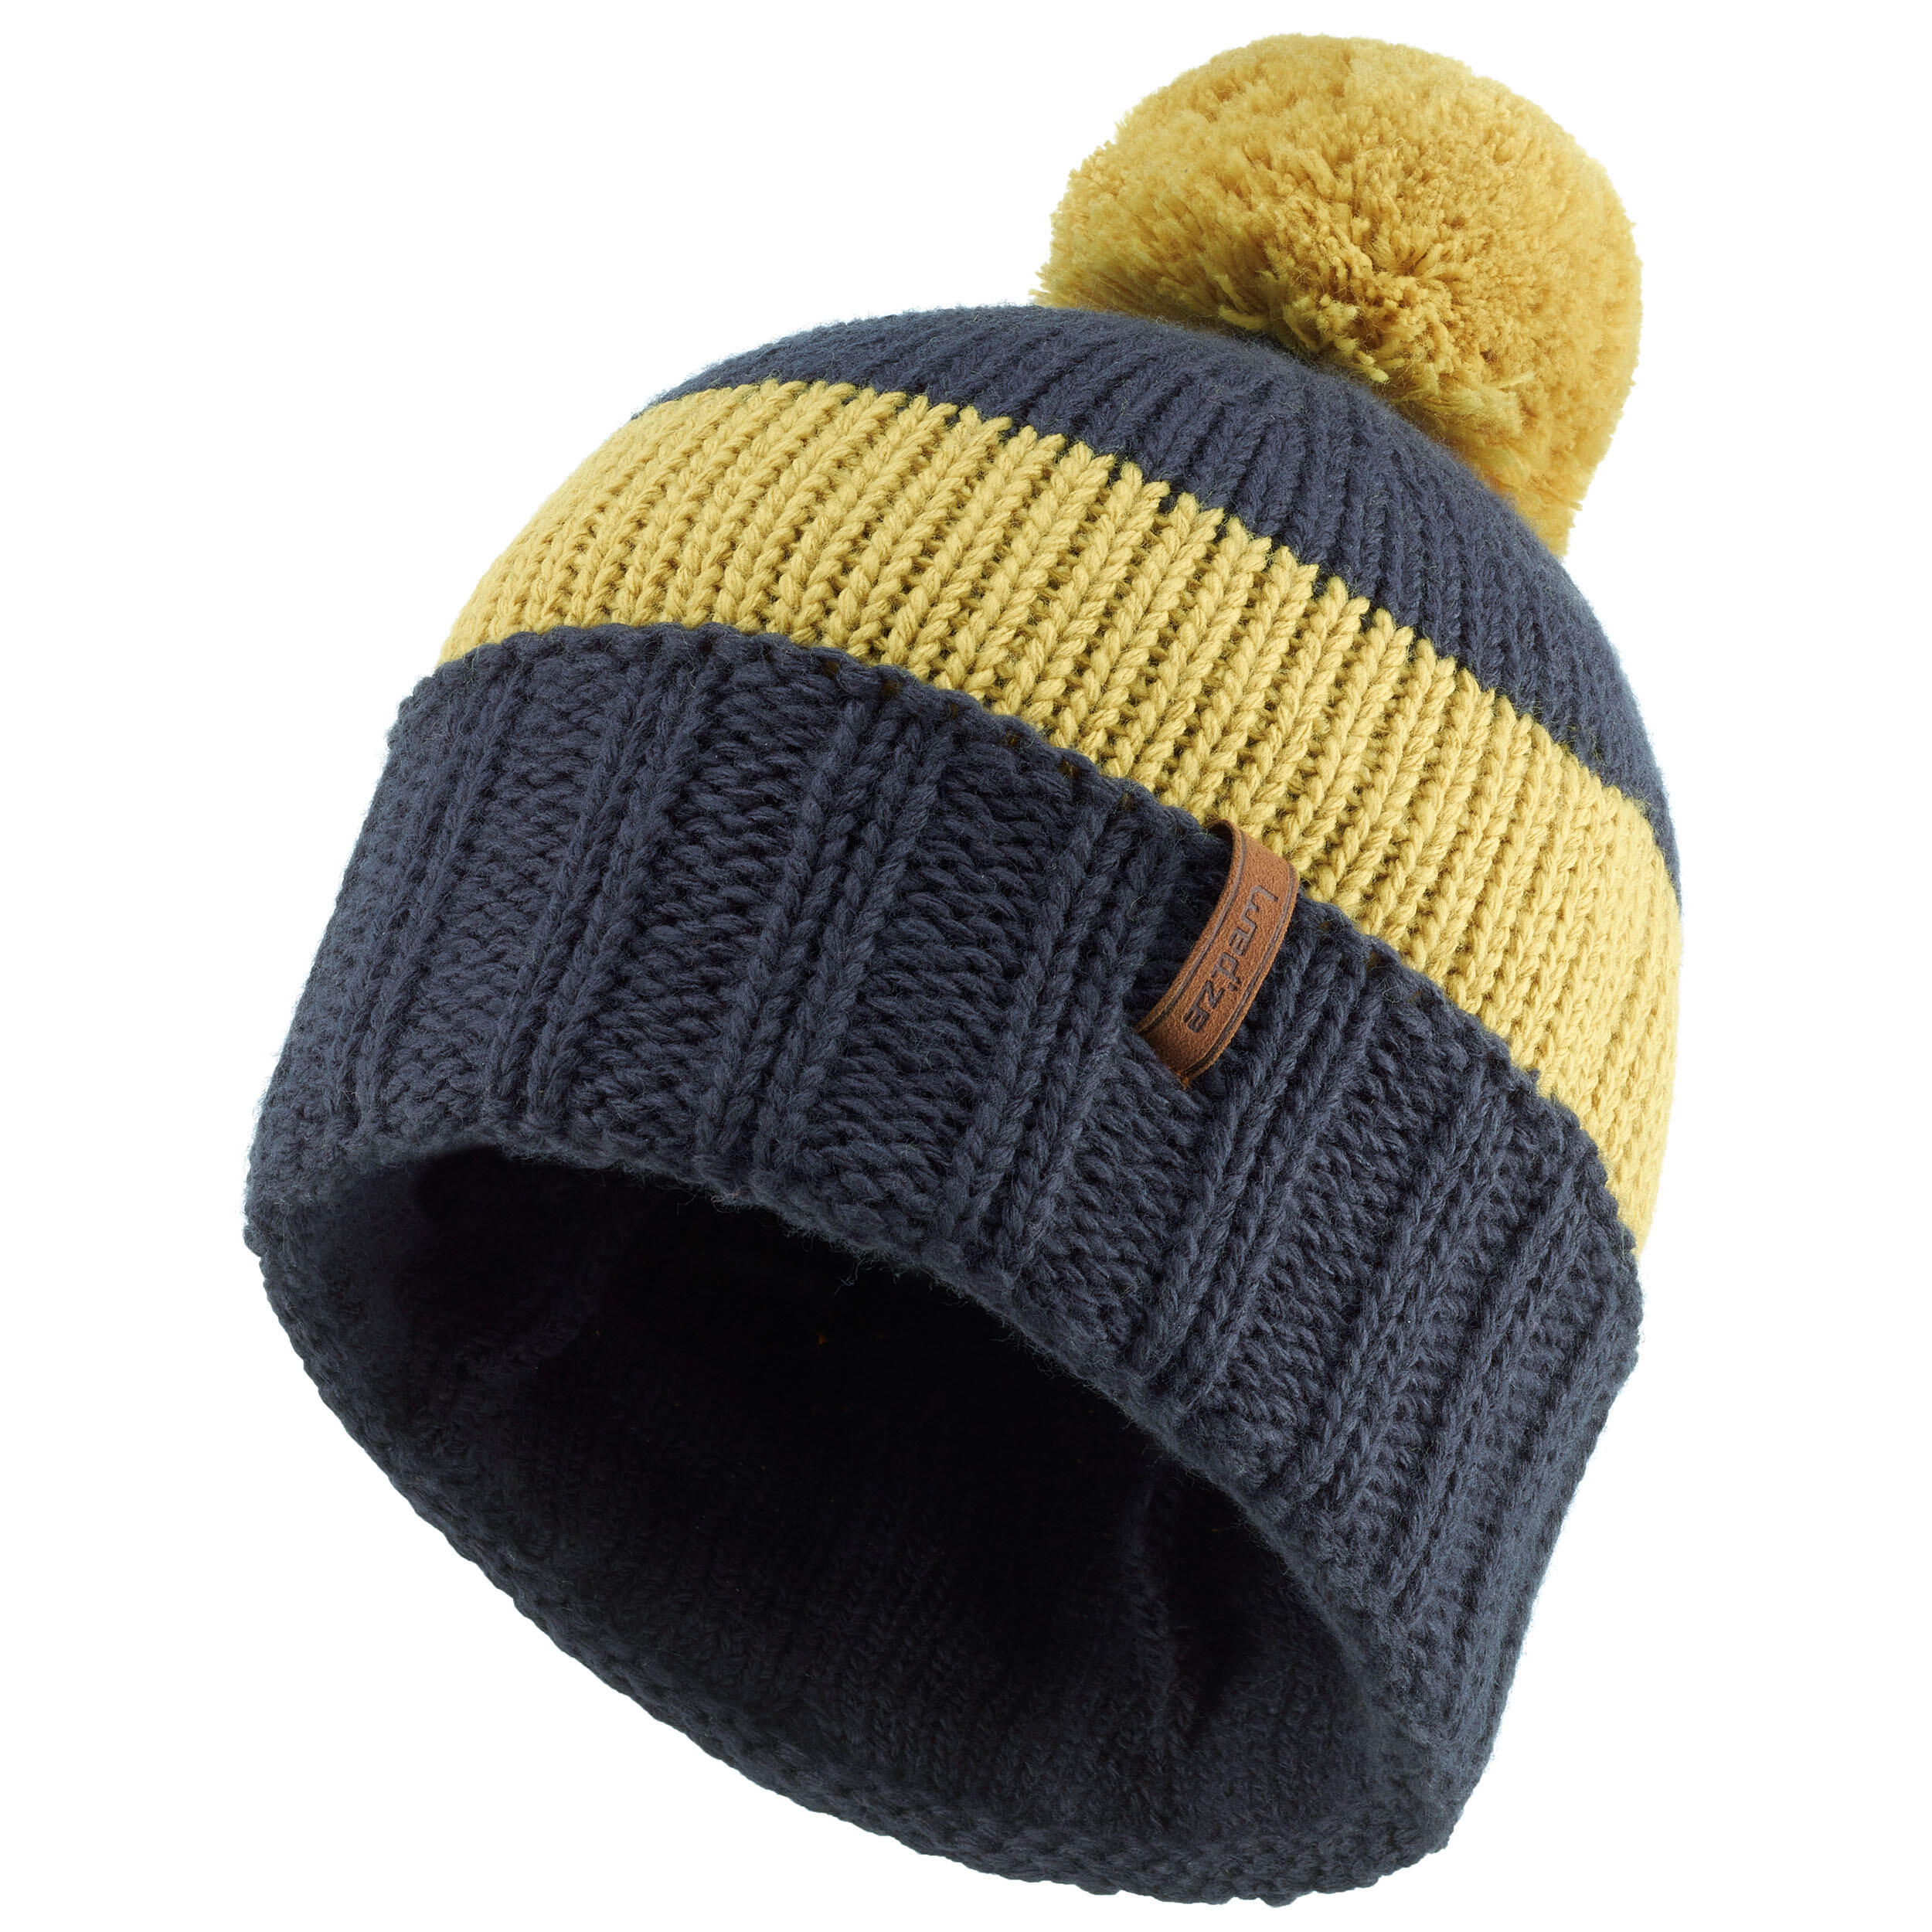 ADULT SKI HAT GRAND NORD MADE IN FRANCE NAVY BLUE-OCHRE 4/8